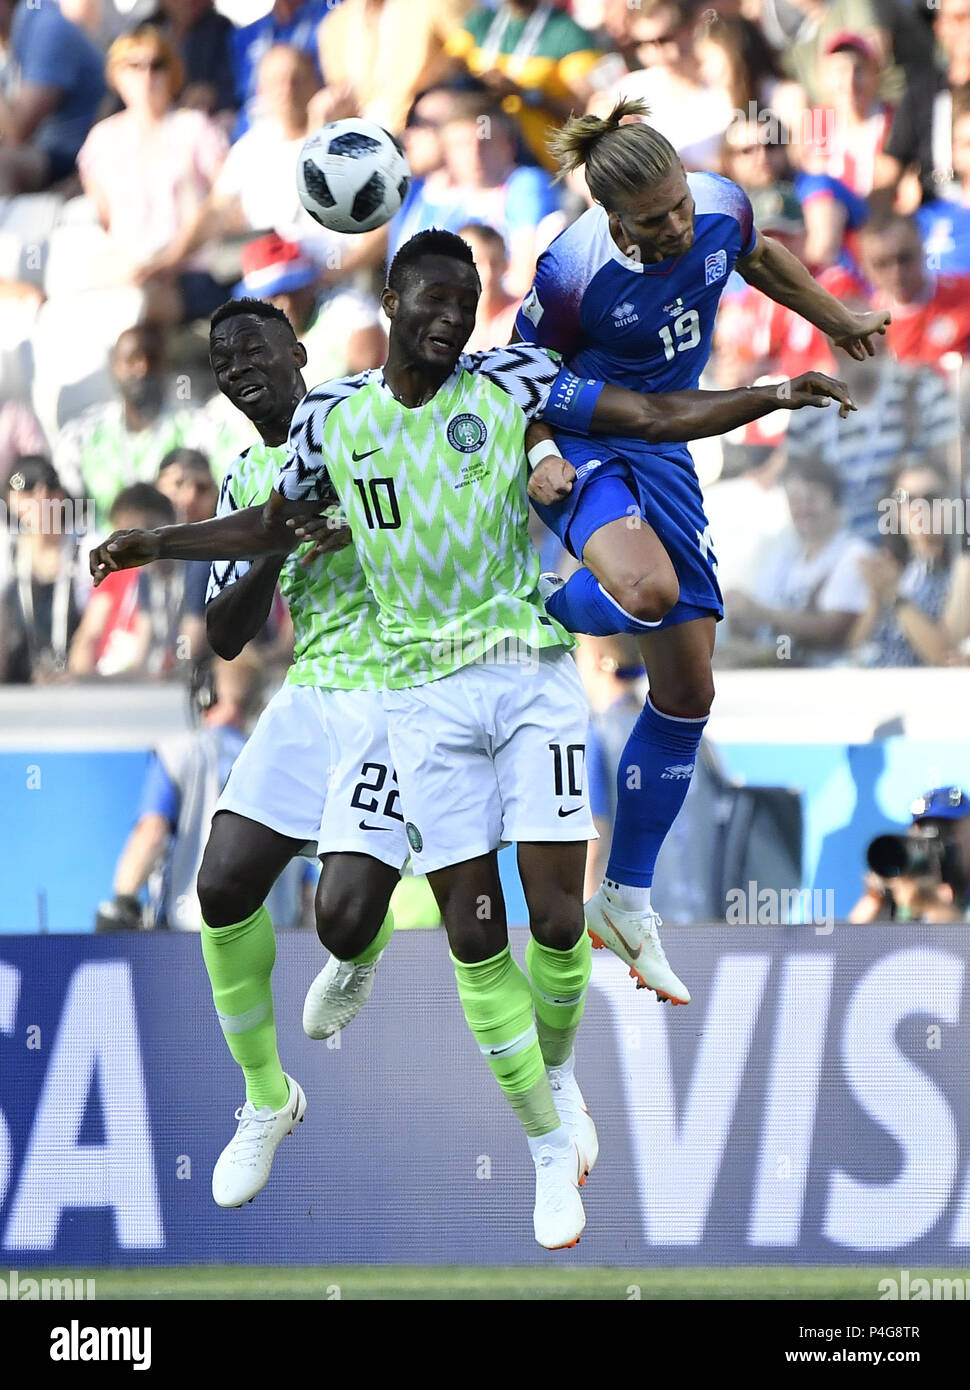 Volgograd, Russia. 22nd June, 2018. Rurik Gislason (R) of Iceland vies with John Obi Mikel (C) and Kenneth Omeruo of Nigeria during the 2018 FIFA World Cup Group D match between Nigeria and Iceland in Volgograd, Russia, June 22, 2018. Credit: He Canling/Xinhua/Alamy Live News Stock Photo